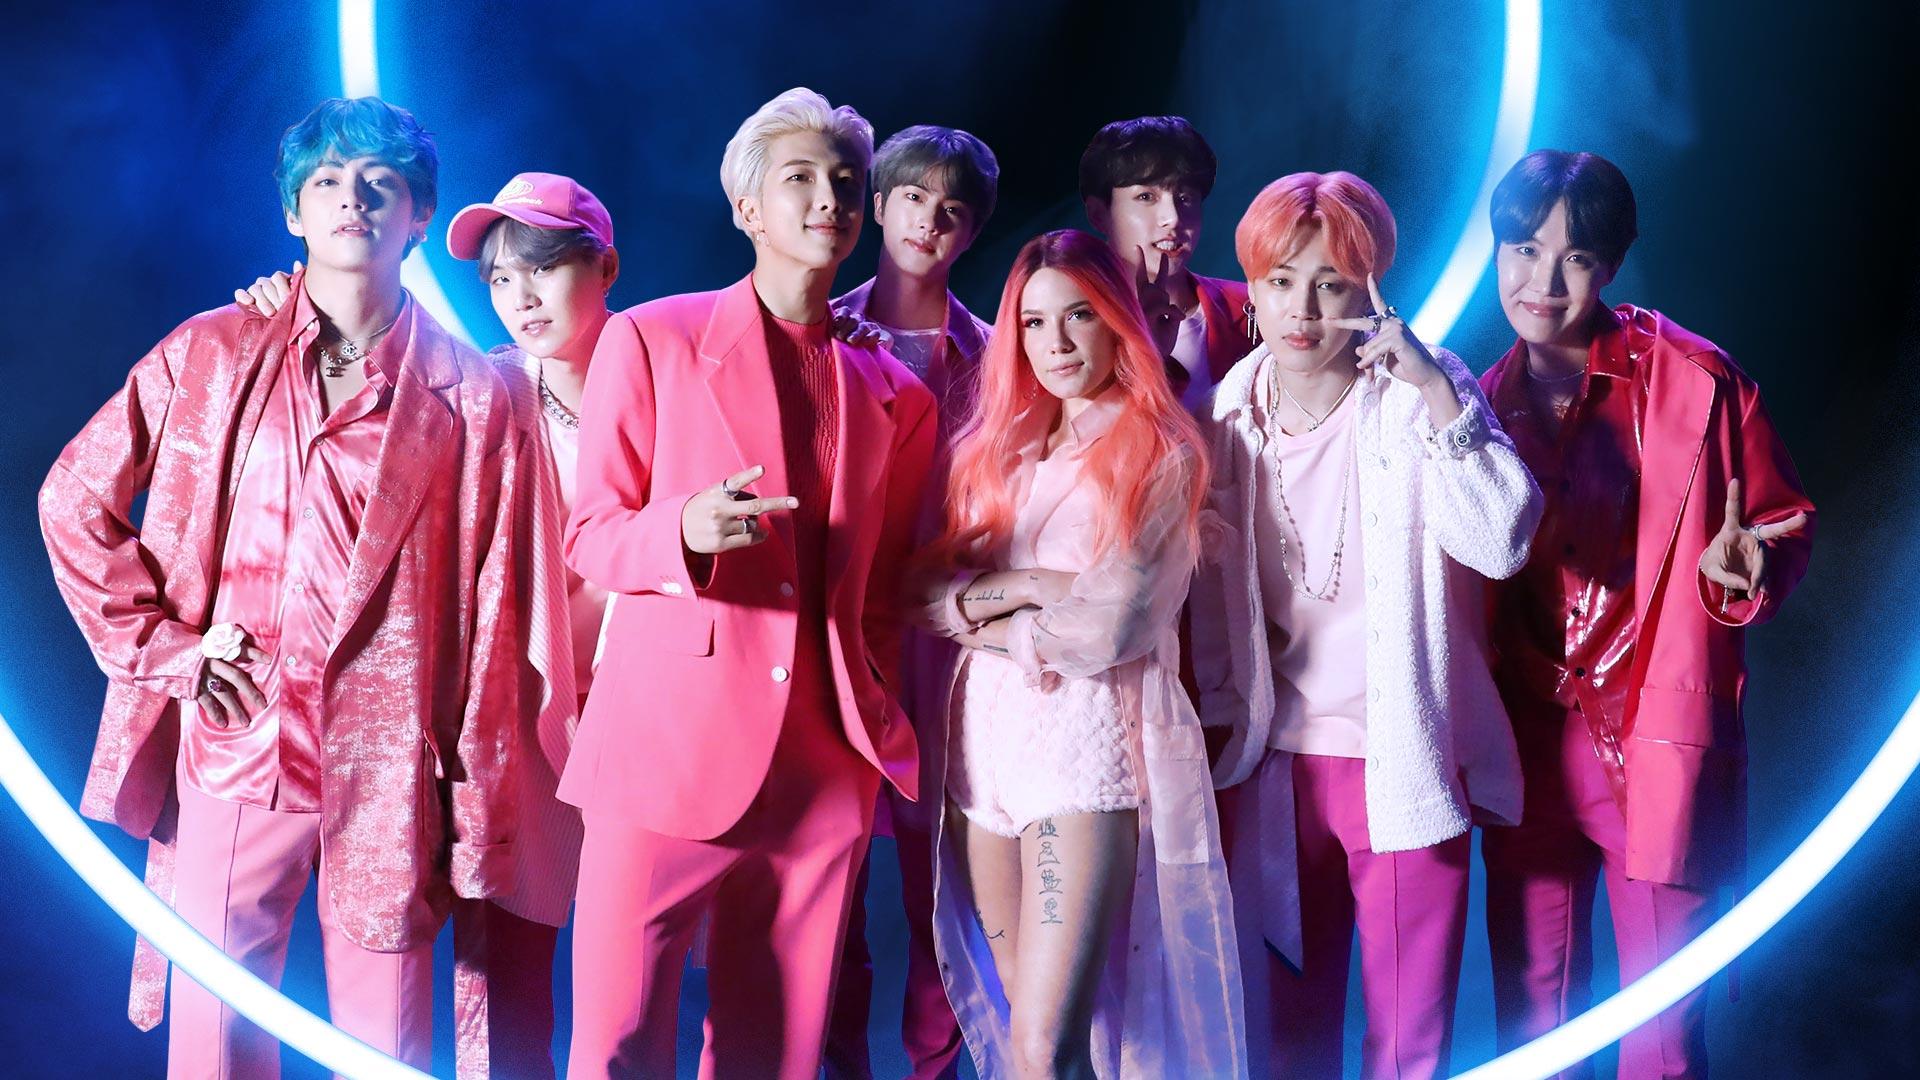 BTS and Halsey to Perform “Boy With Luv” at the 2019 BBMAs